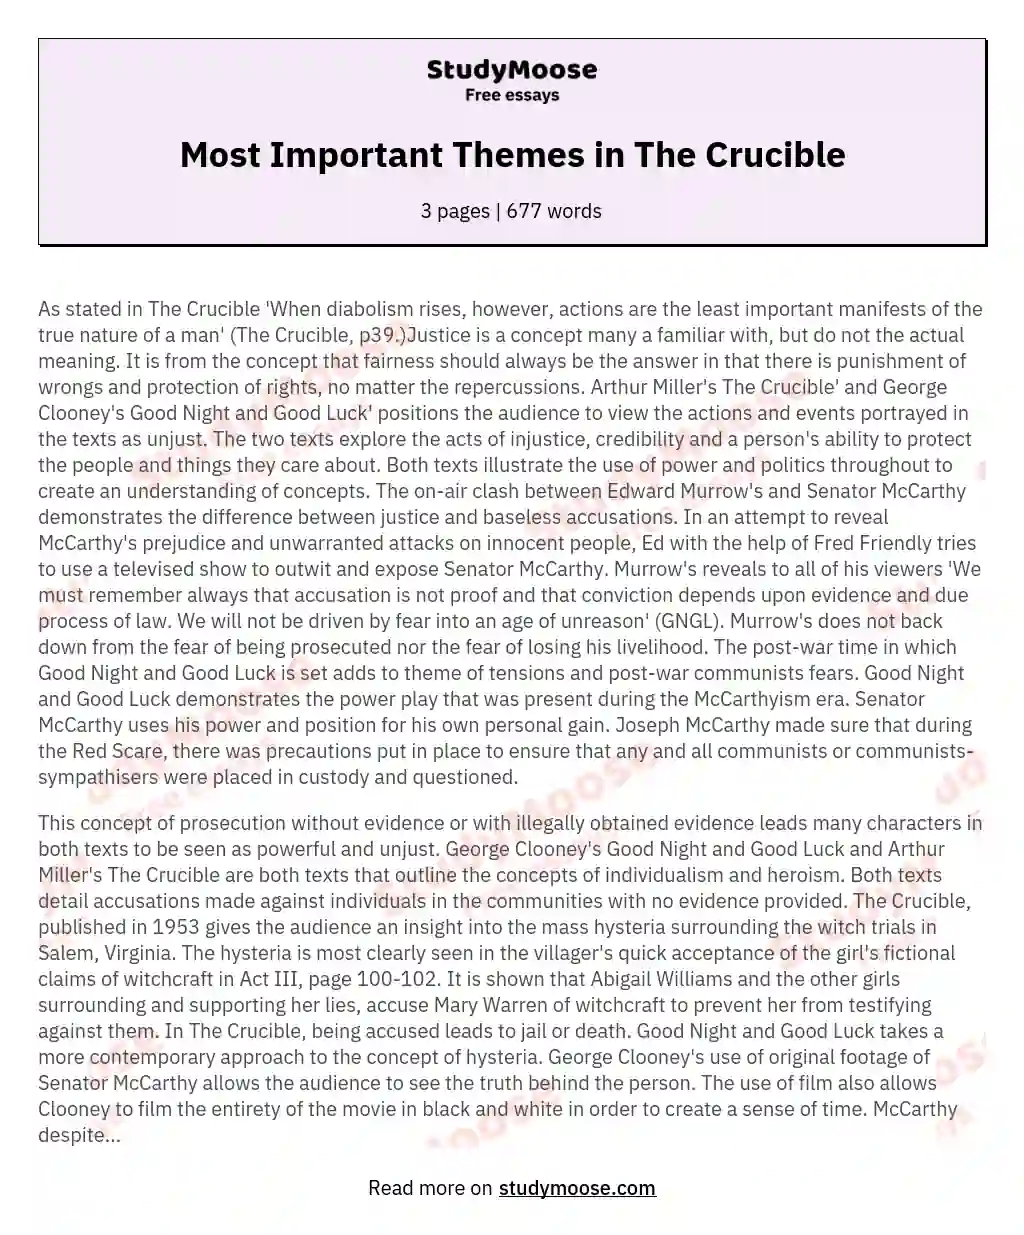 Most Important Themes in The Crucible essay